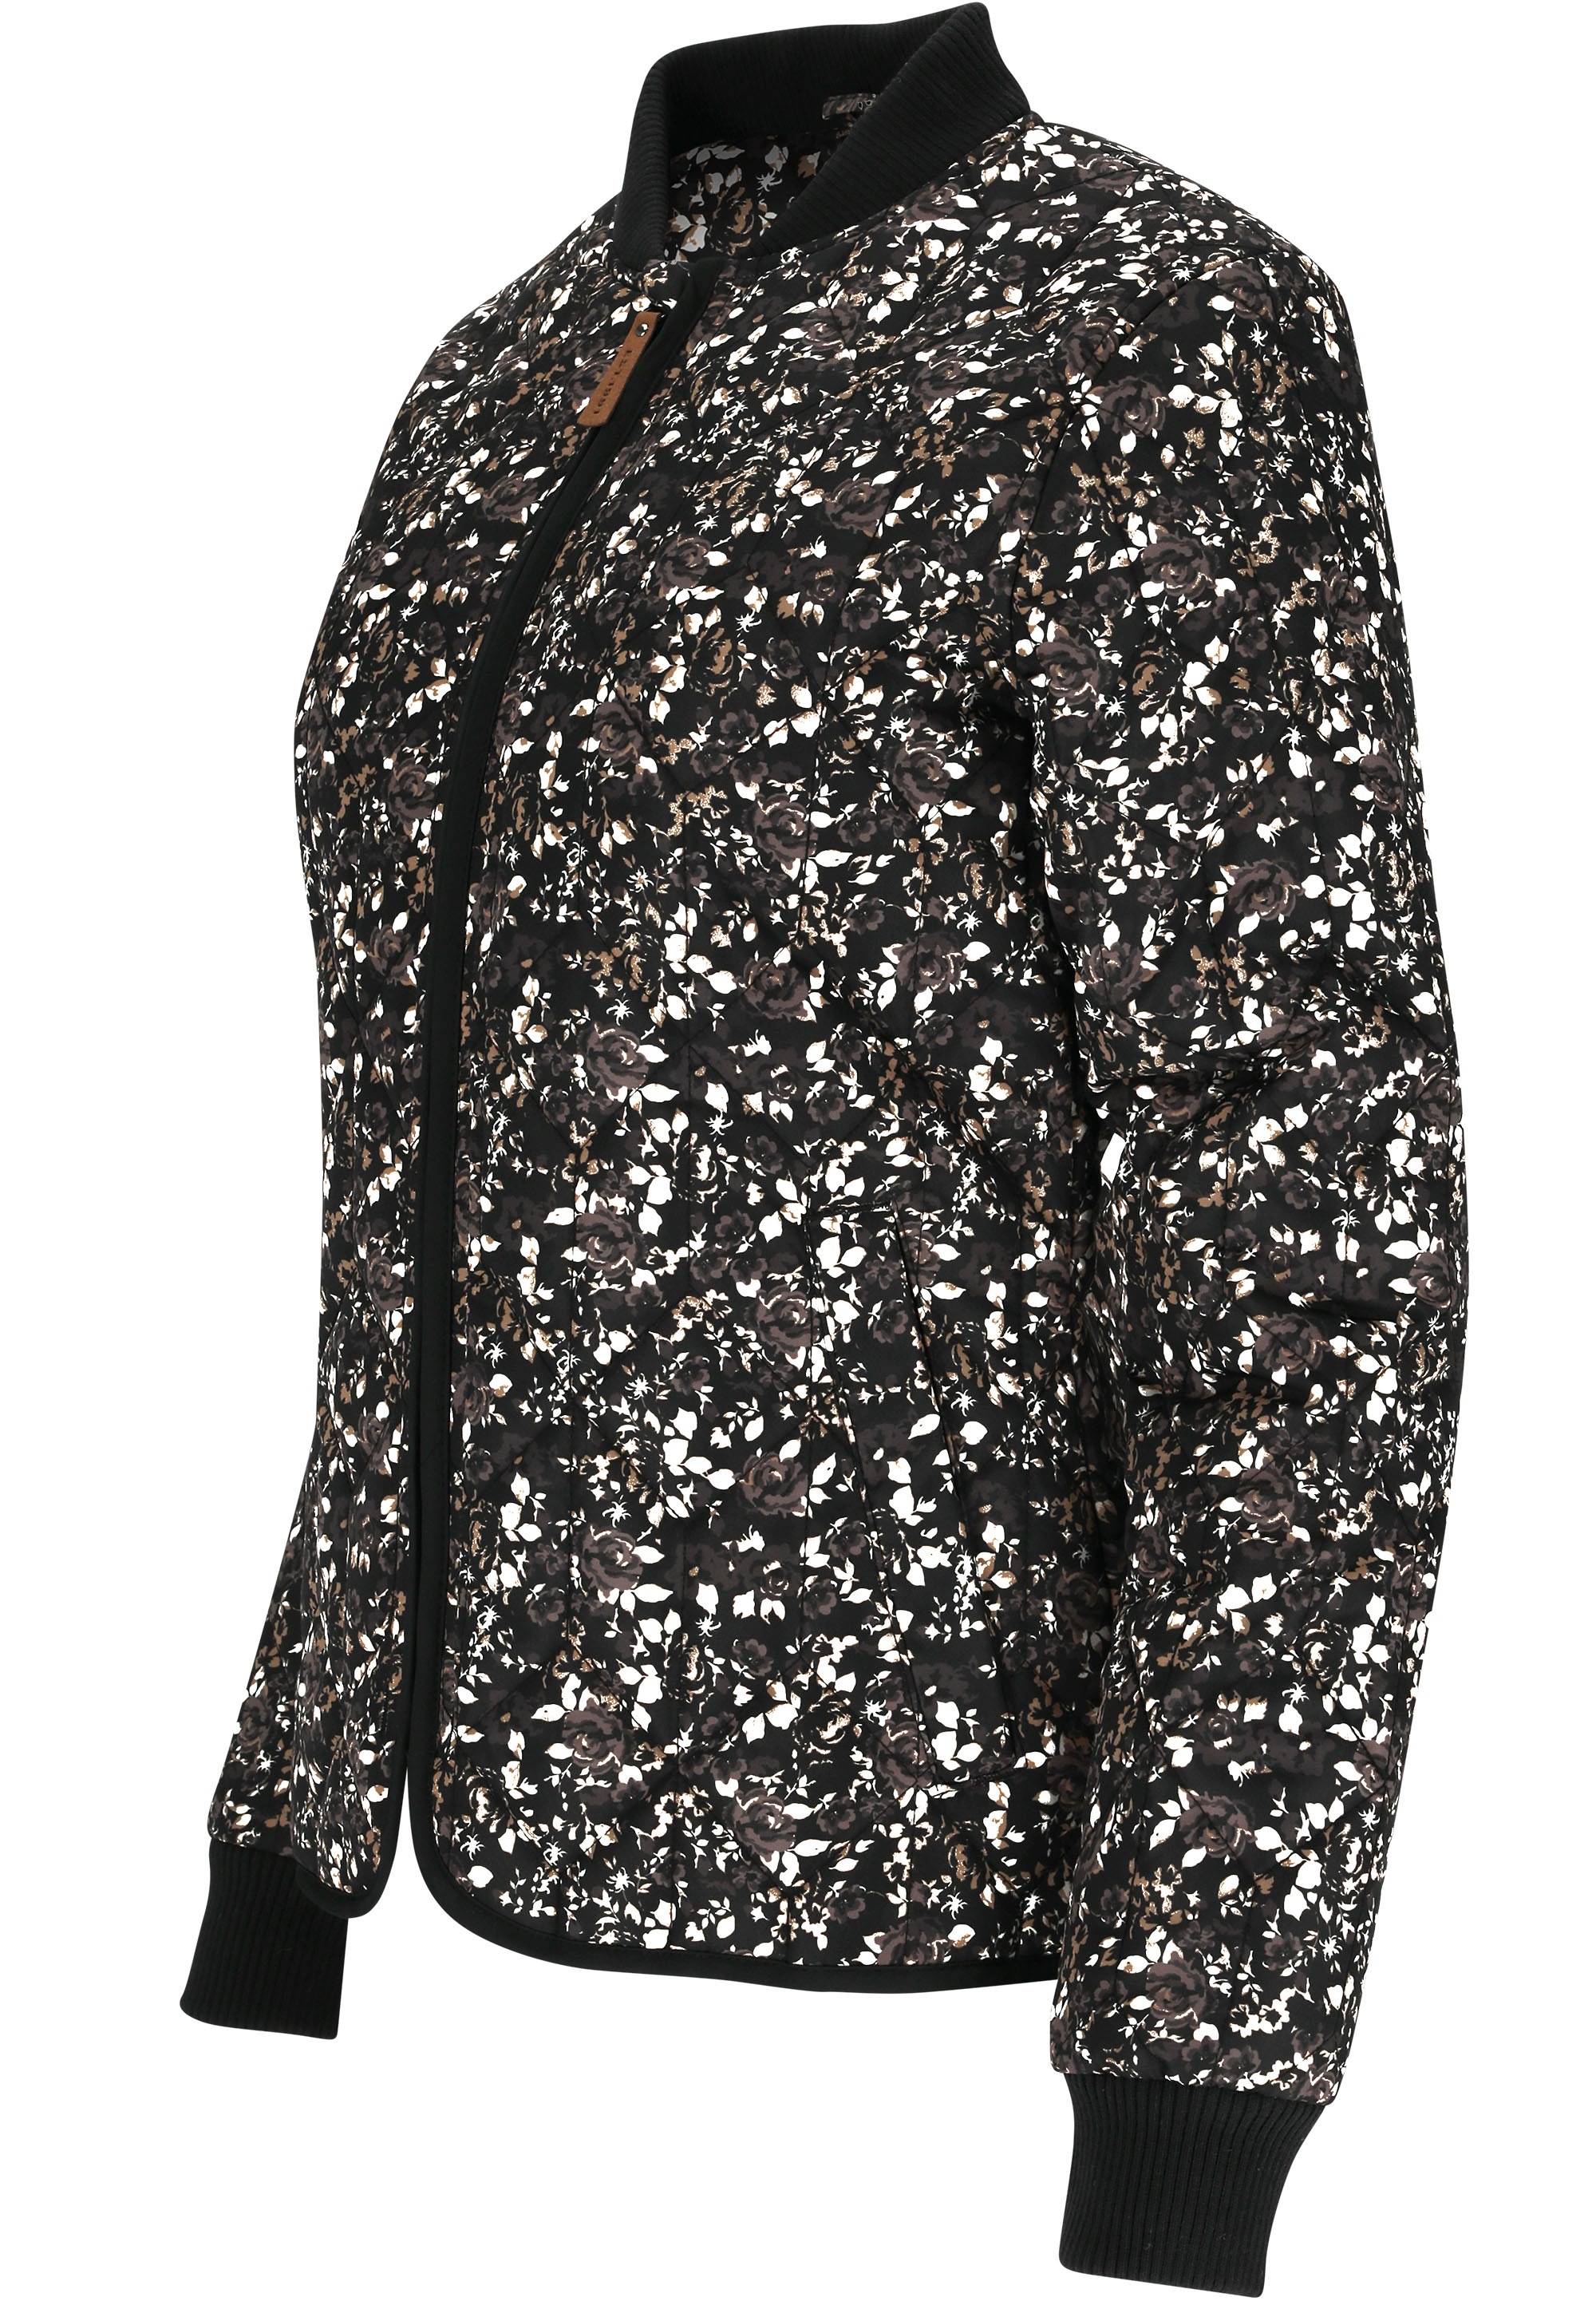 WEATHER REPORT Outdoorjacke online floralem Allover-Muster mit »Floral«